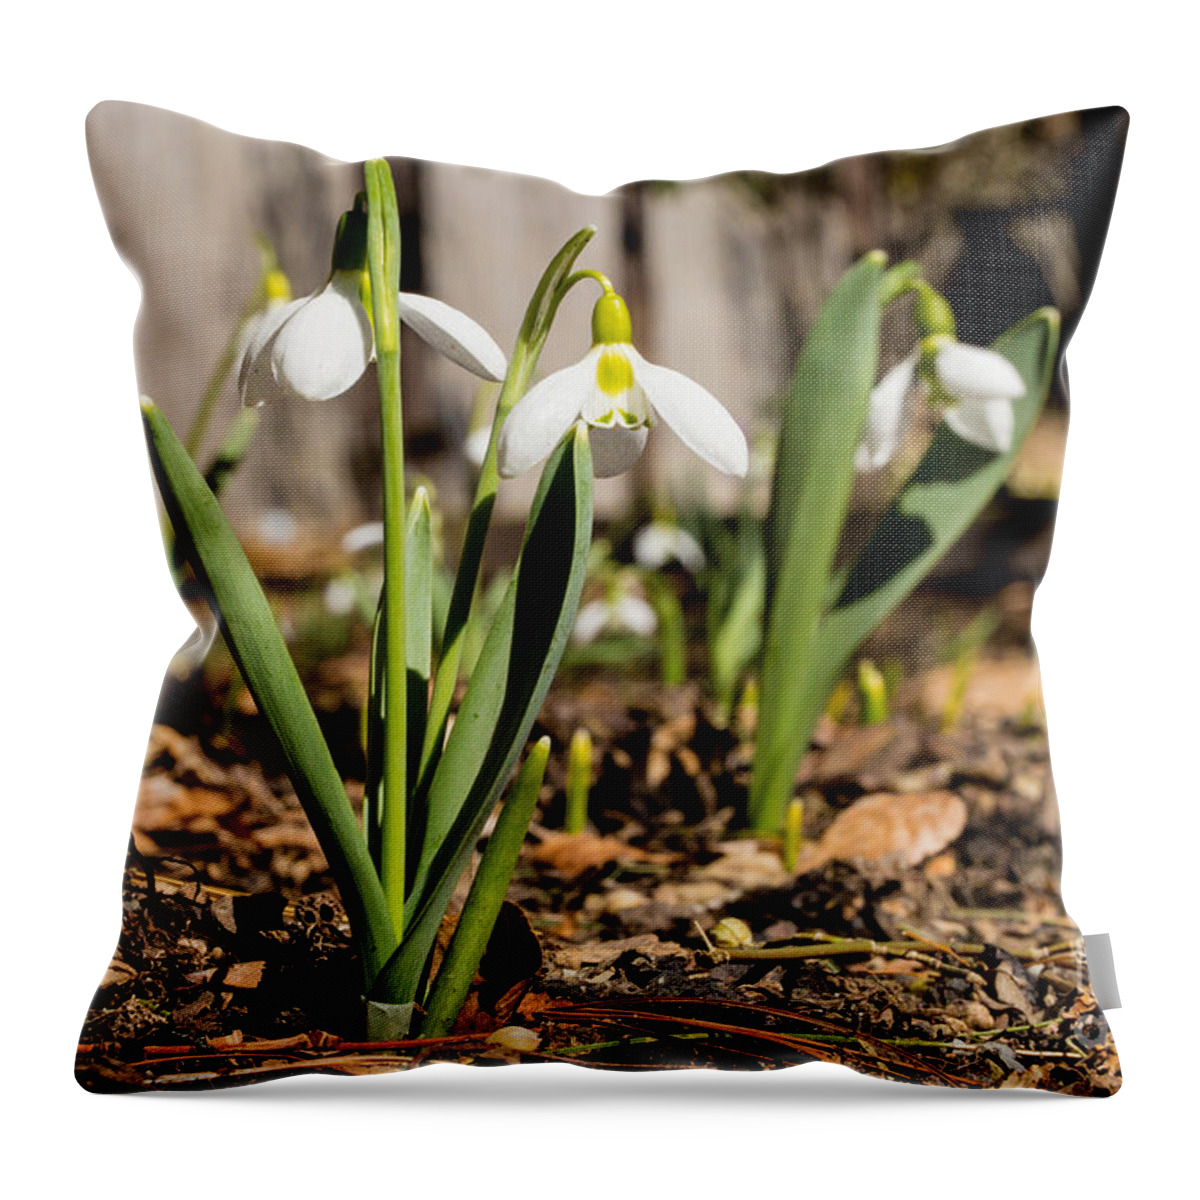 Snowbell Throw Pillow featuring the photograph Blooming Snowbells by Brad Marzolf Photography